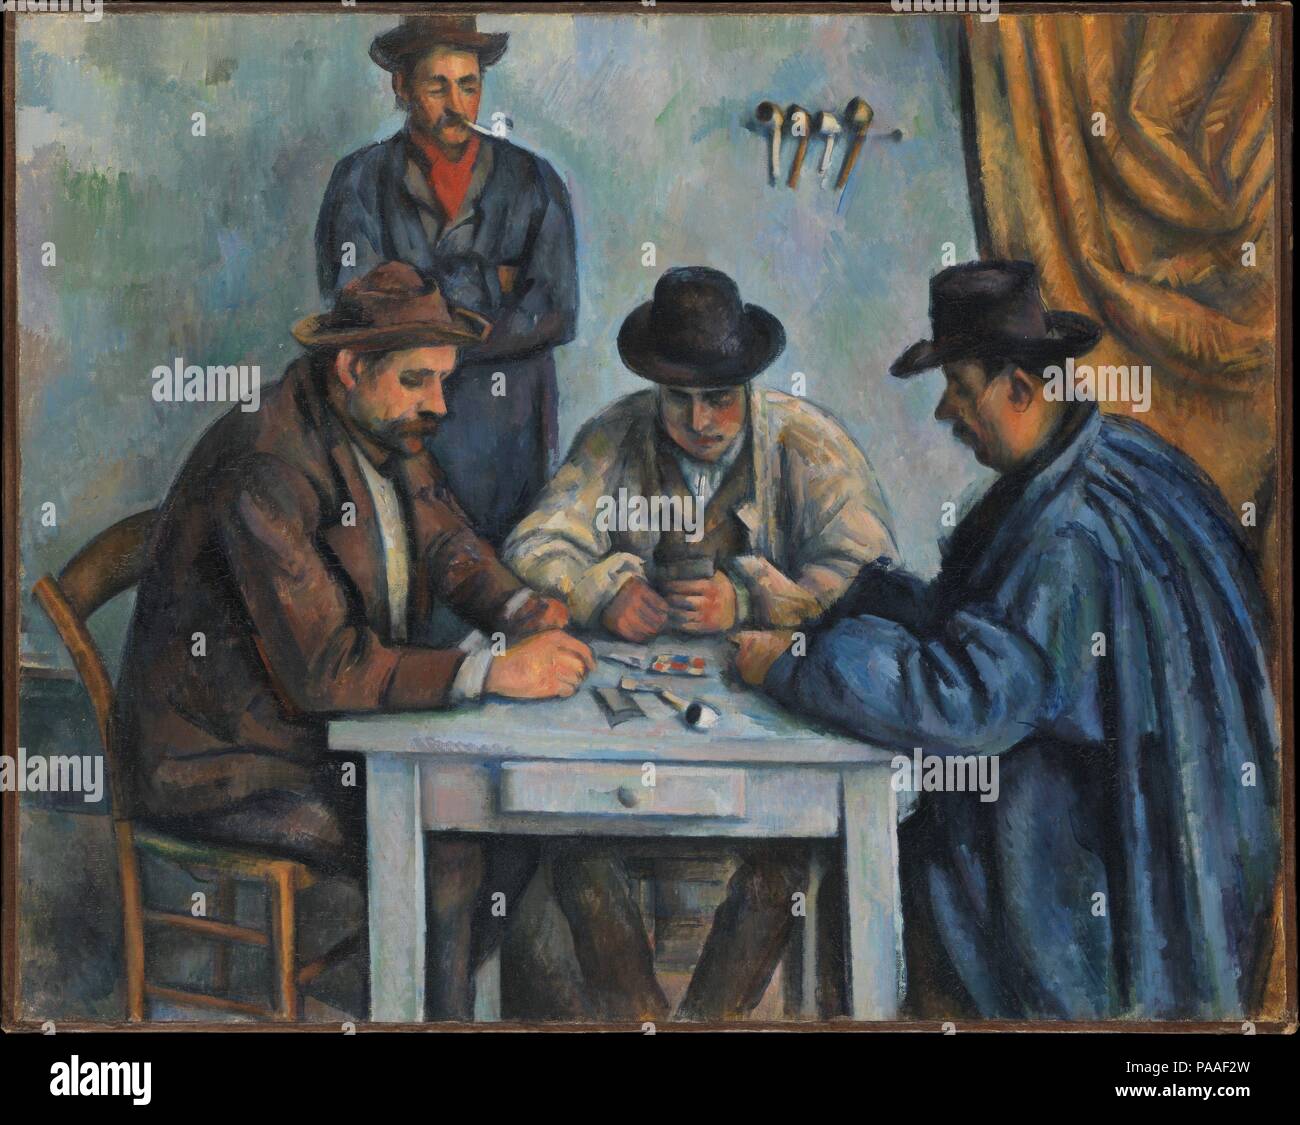 The Card Players. Artist: Paul Cézanne (French, Aix-en-Provence 1839-1906 Aix-en-Provence). Dimensions: 25 3/4 x 32 1/4 in. (65.4 x 81.9 cm). Date: 1890-92.    This is probably the first in a series of five paintings that Cézanne devoted to peasants playing cards. Enlisting local farmhands to serve as models, he may have drawn inspiration for his genre scene from a seventeenth-century painting by the Le Nain brothers in the museum in his hometown of Aix. The Metropolitan's picture was followed by a version twice its size, which includes the additional figure of a standing child at right (Barne Stock Photo